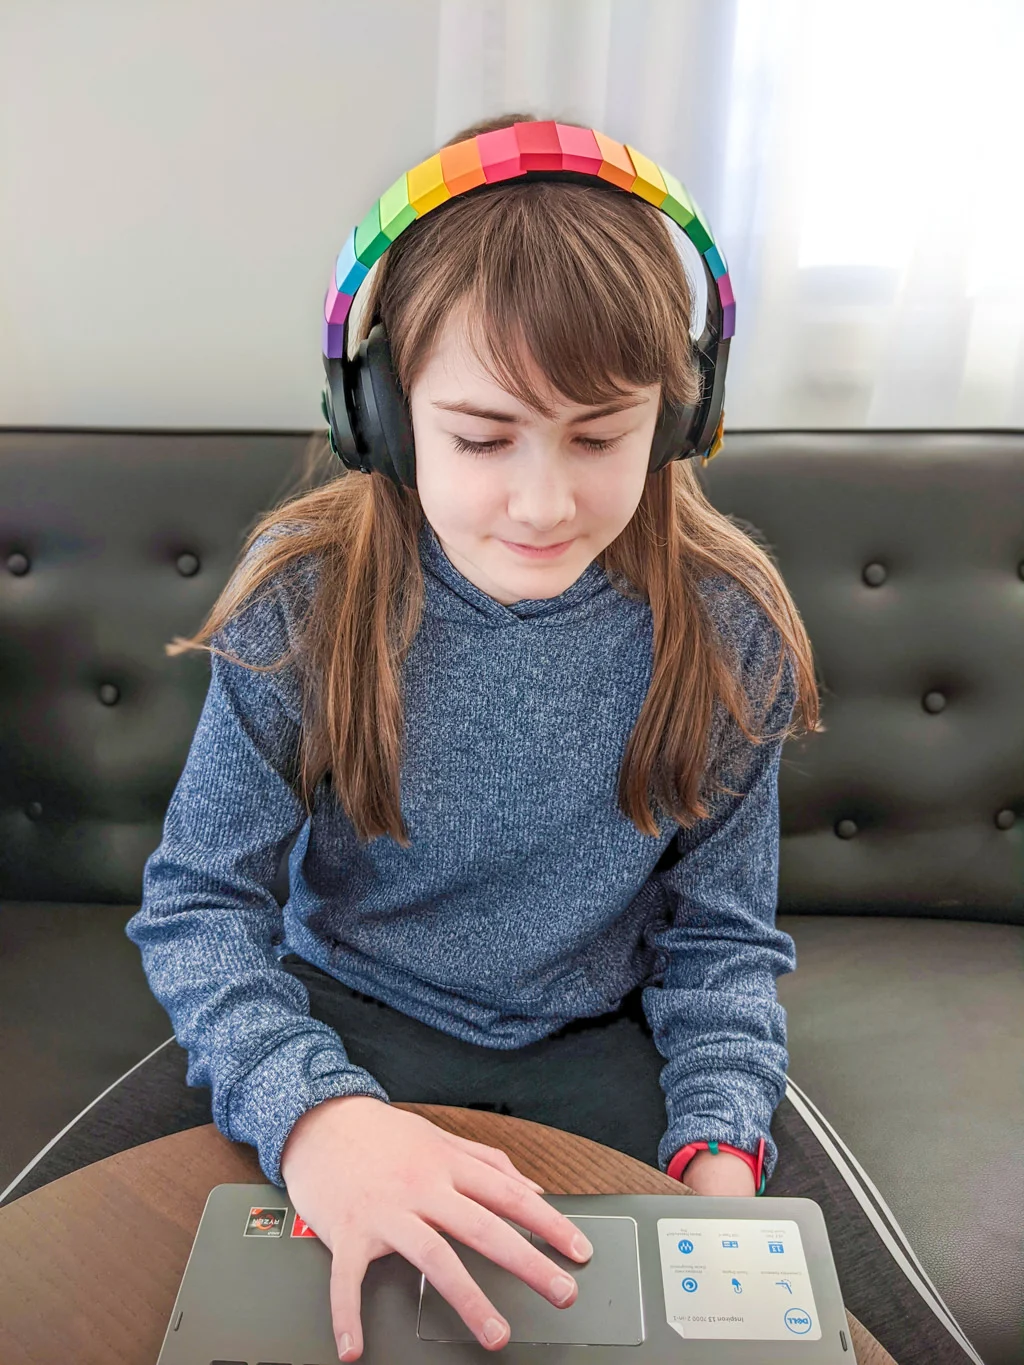 Elise wearing rainbow headphones. Copyright Merriment Design Co. Do not use without written permission.